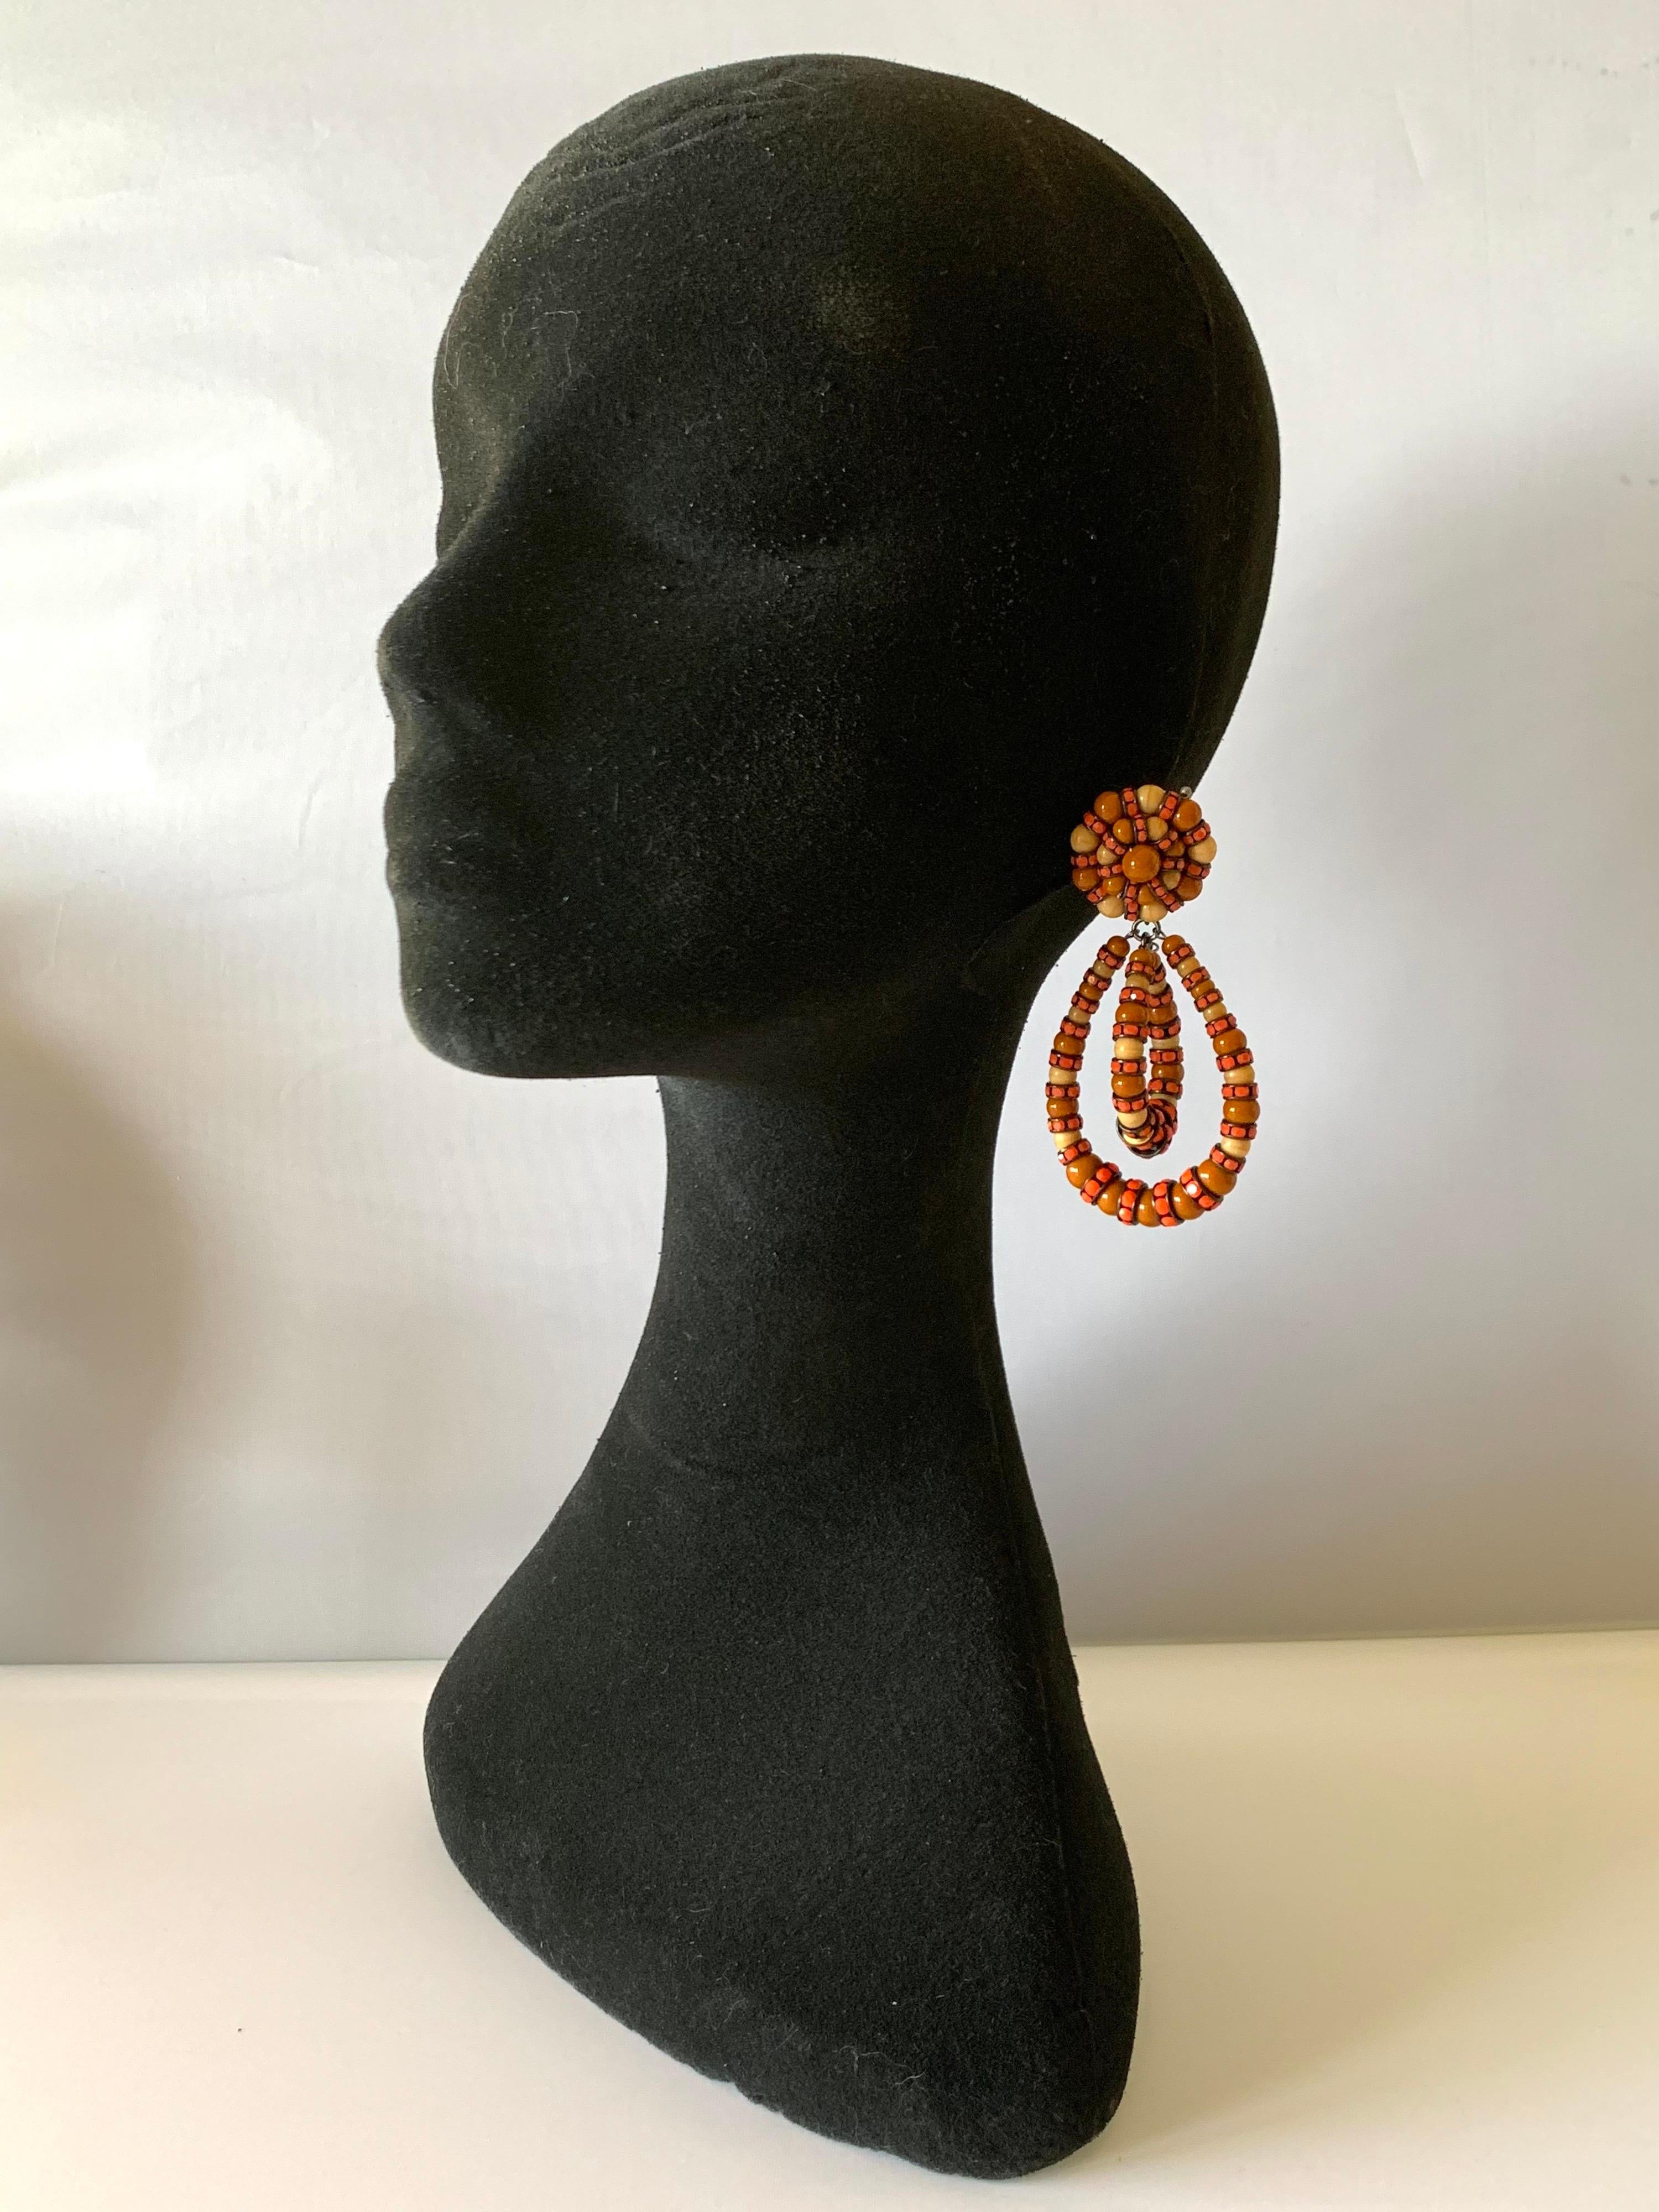 Twisted oval-shaped clip-on hoop statement earrings in warm pumpkin color - handmade glass cabochon and Swarovski crystal rondelles, made in Paris France.